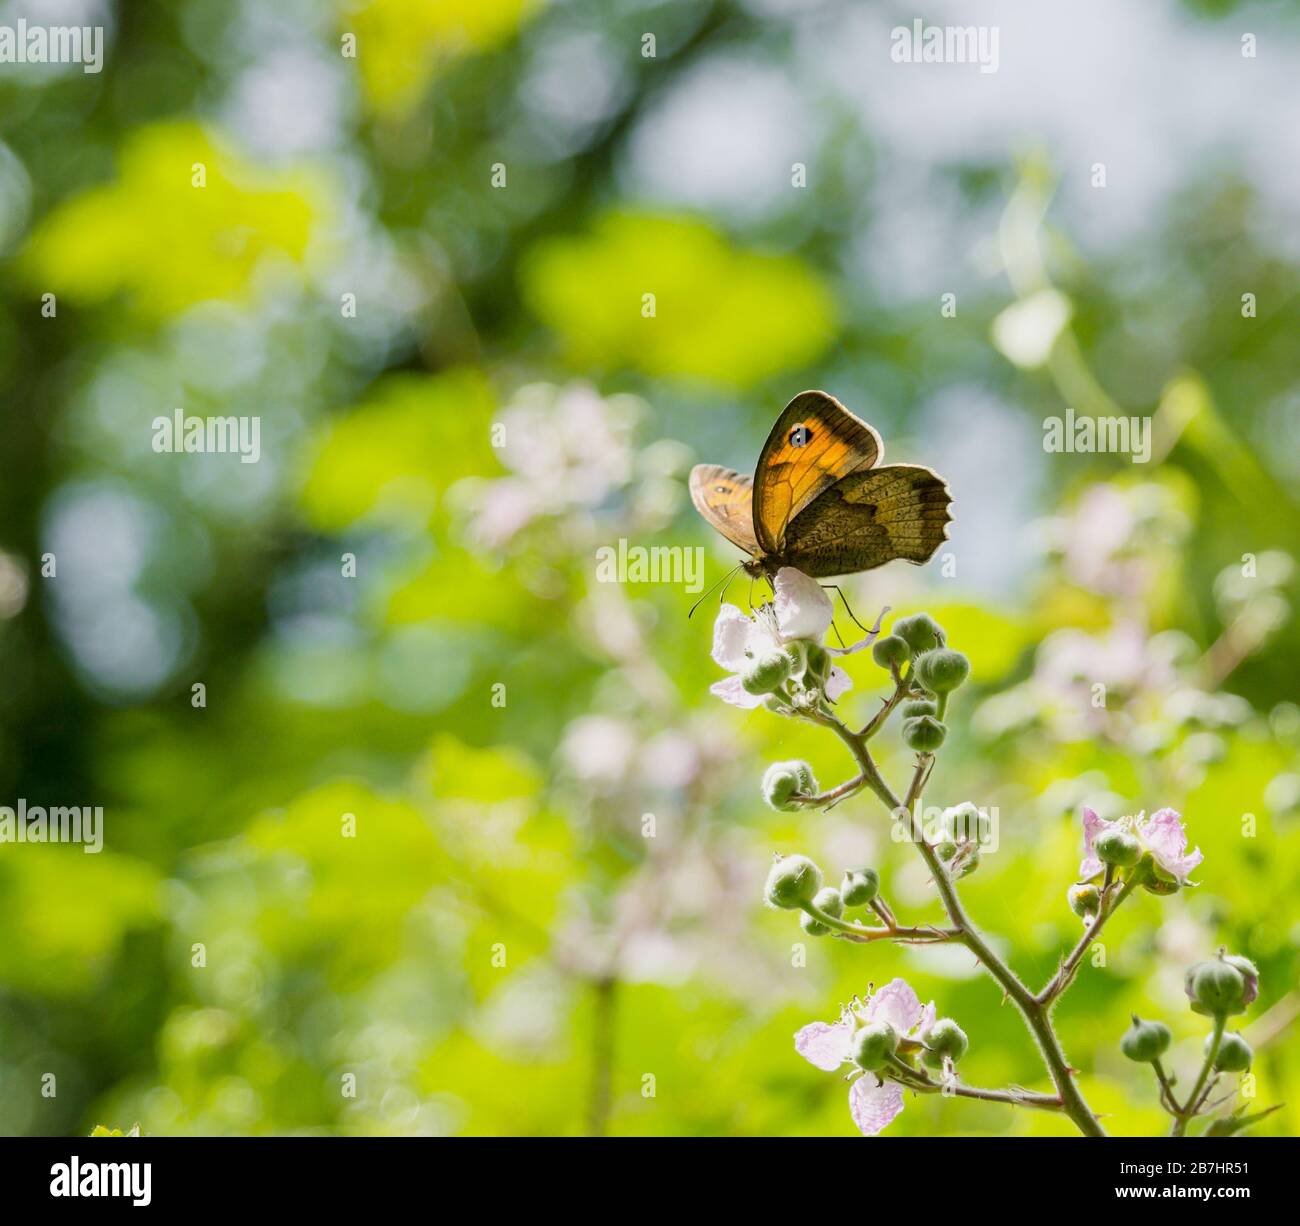 Macro photography of an orange butterfly perched on the flowers of a bush Stock Photo